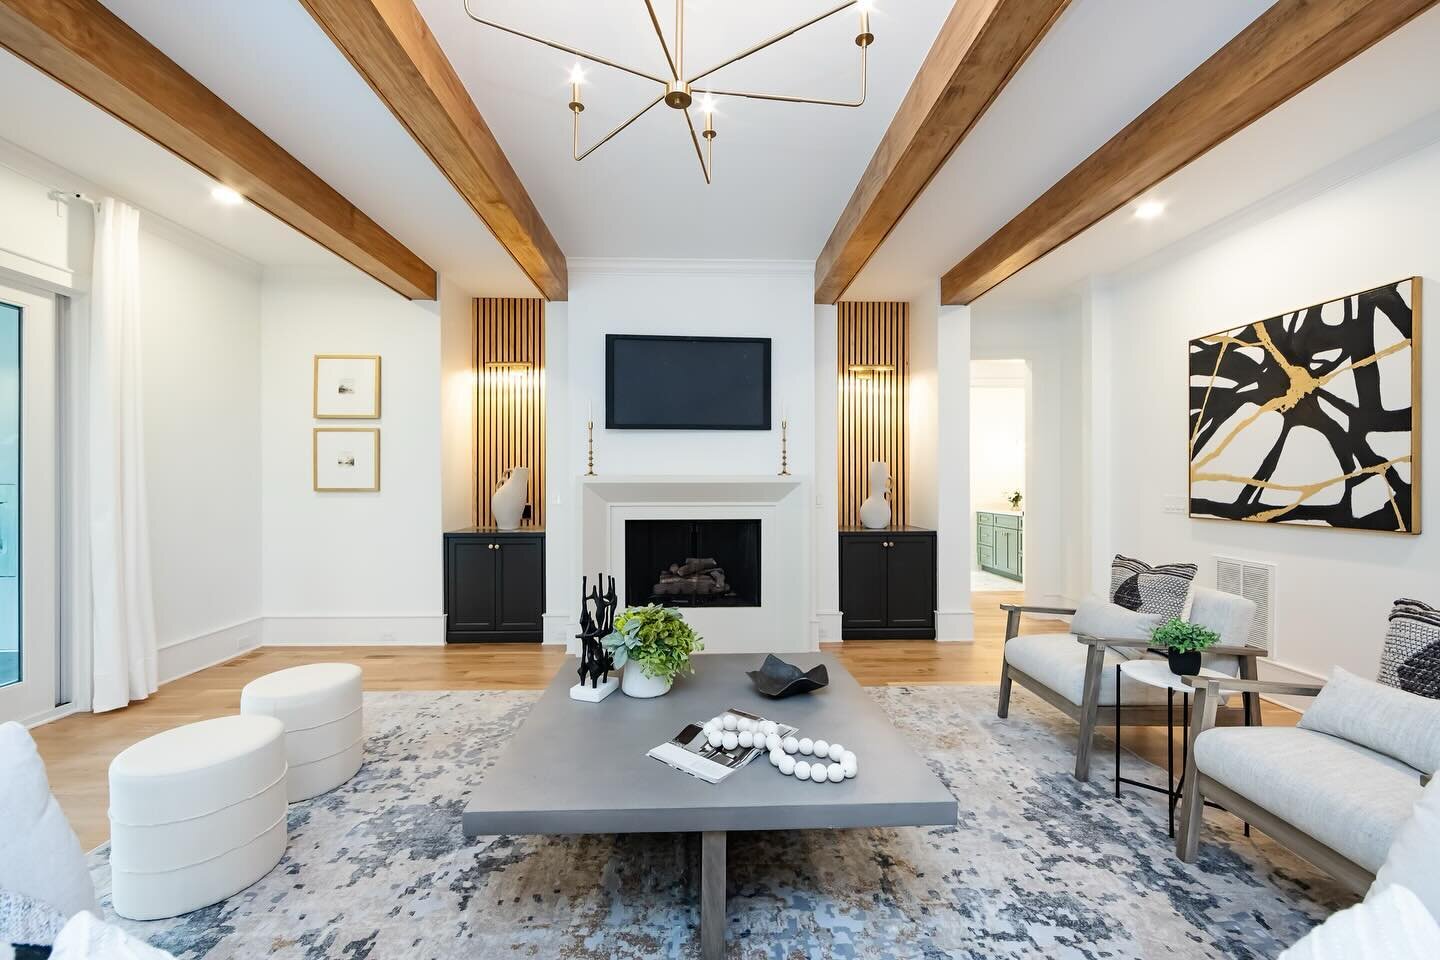 This transitional living space boasts bold geometric lines and a neutral color scheme, accented with natural wood tones and pops of black and gold. It&rsquo;s a symphony of style that creates a harmonious and chic atmosphere! 🎶💕

#TransitionalDesig